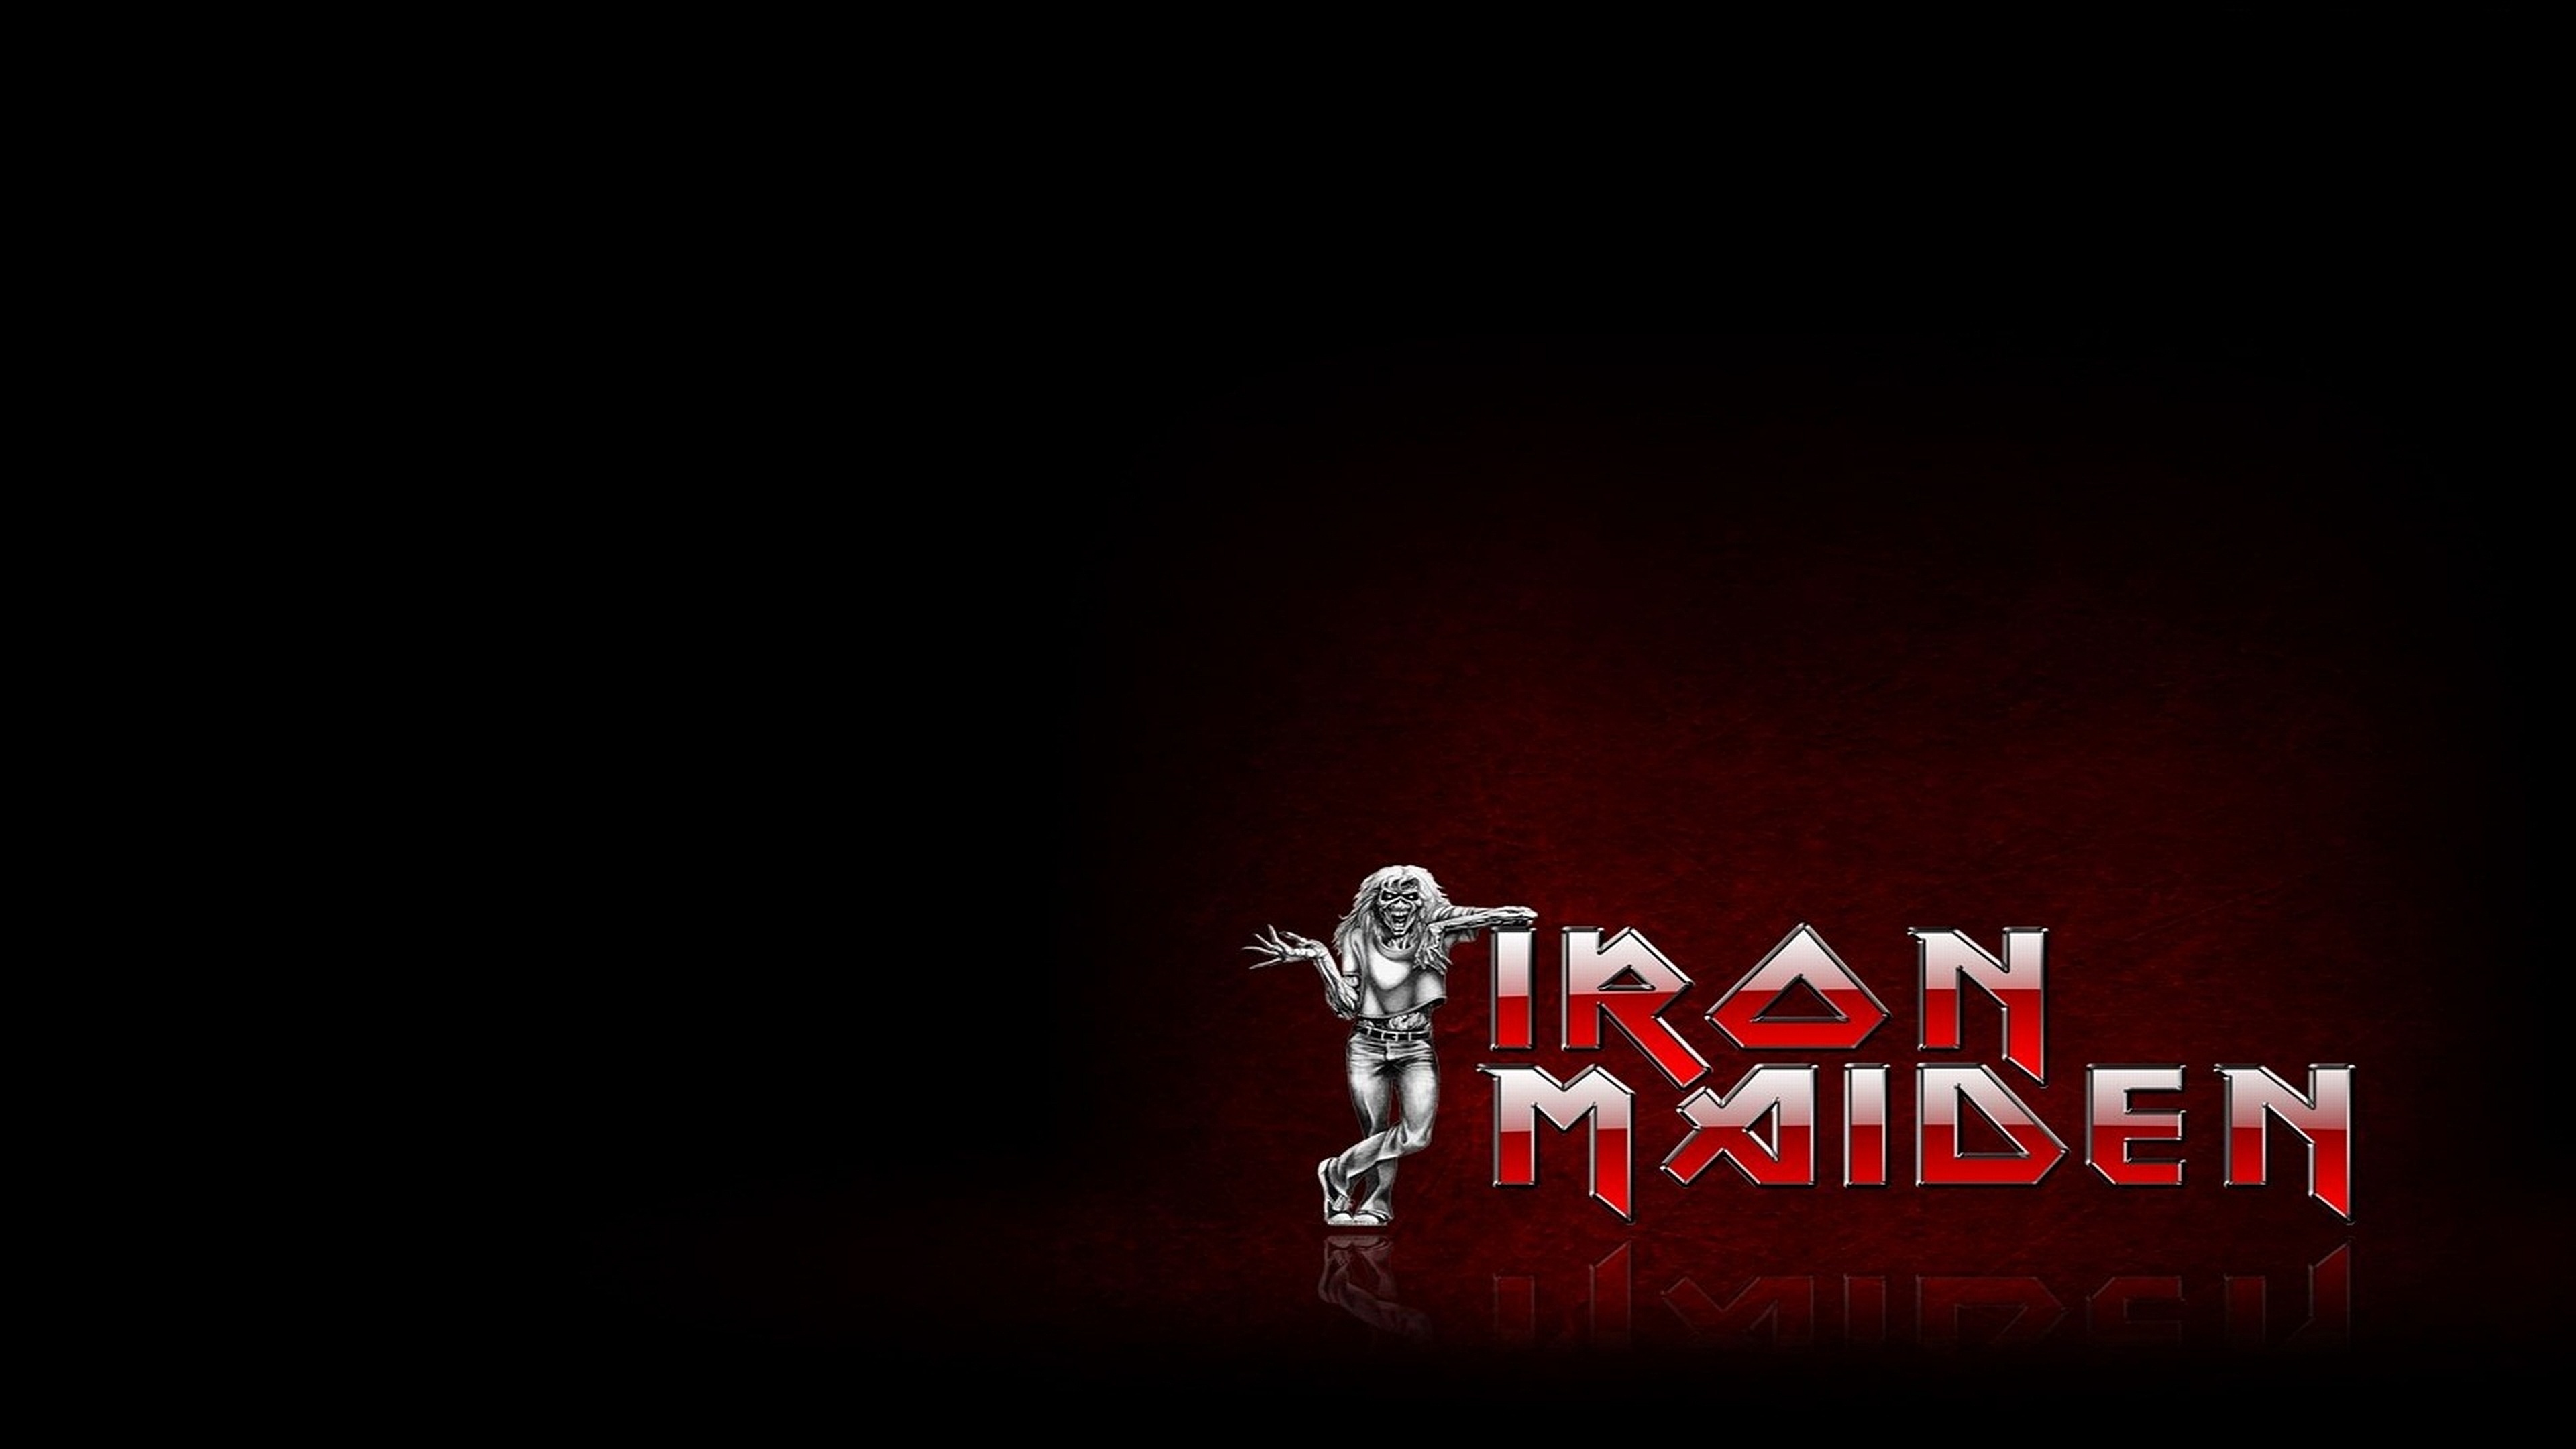 Iron Maiden Band Music, Iconic band logo, Recognizable branding, Sign of metal authenticity, 3840x2160 4K Desktop